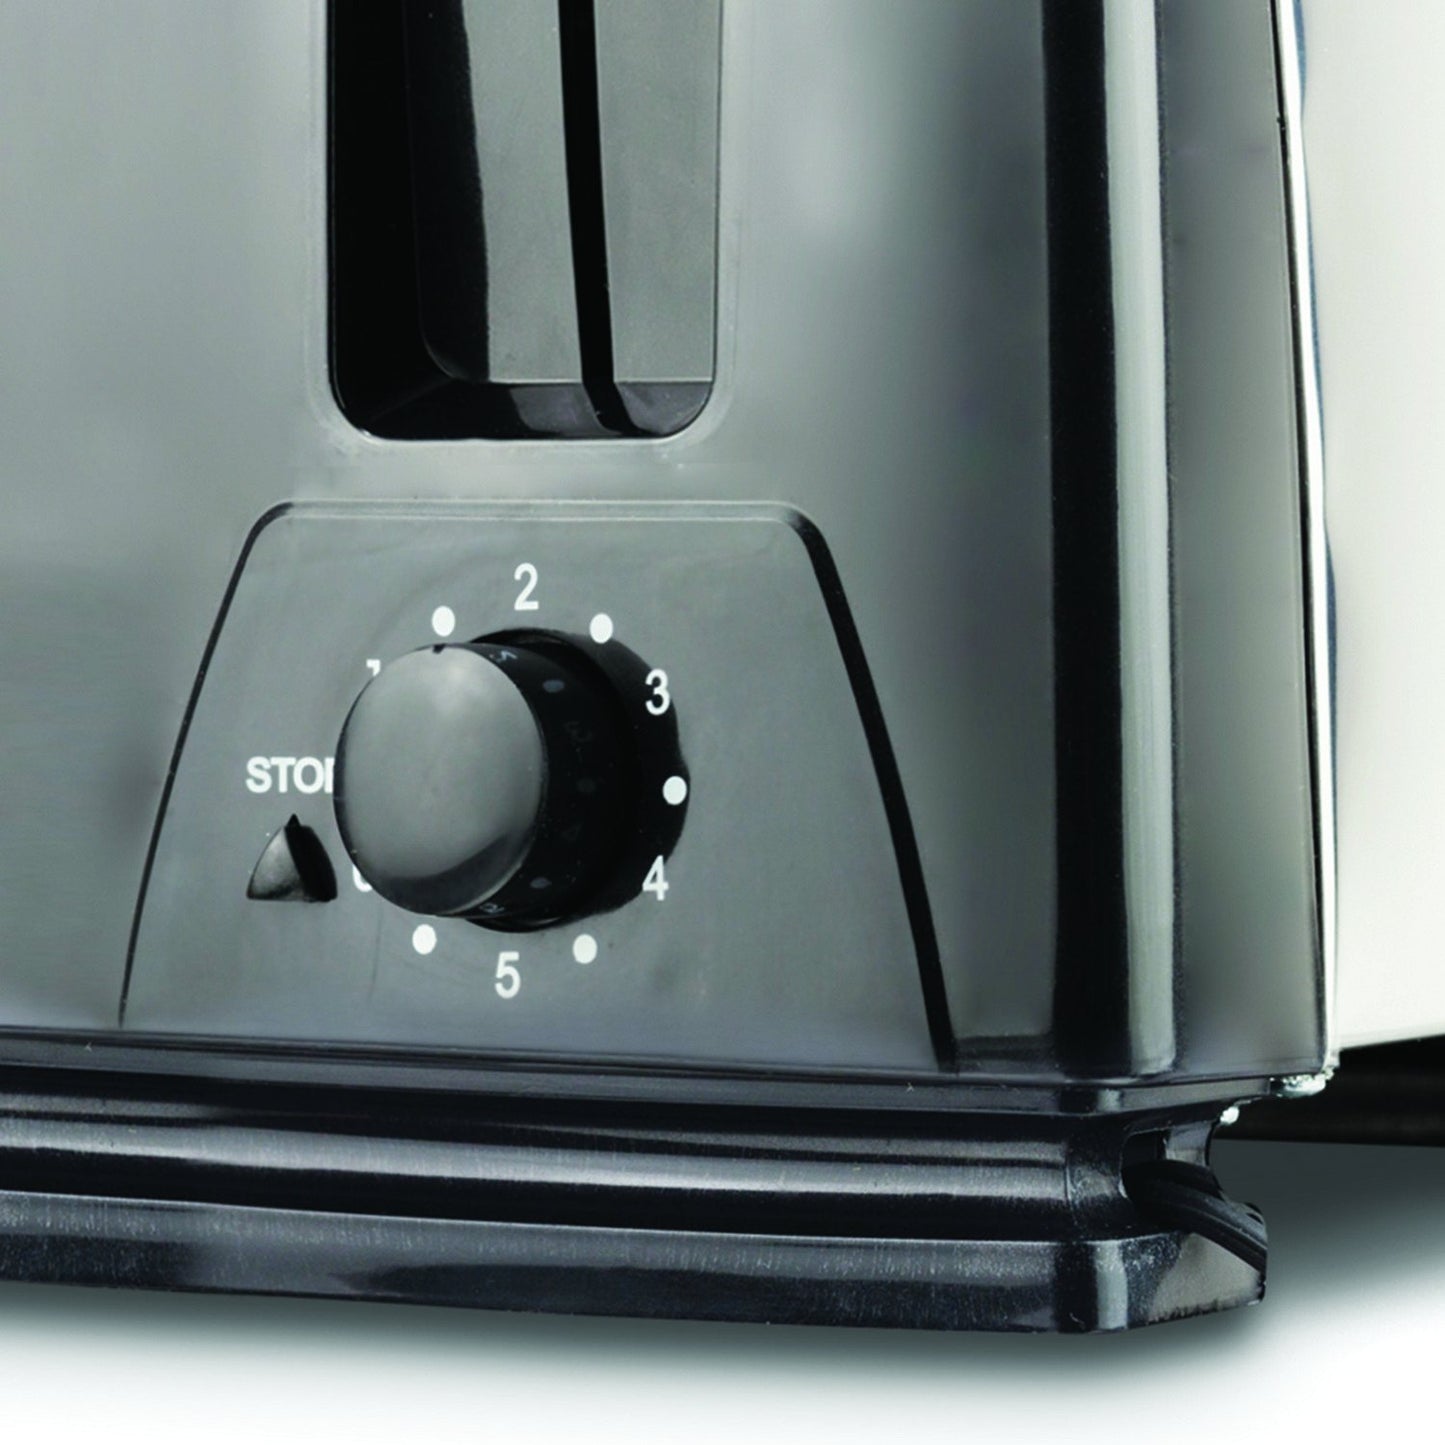 Brentwood Appliances TS284 4-Slice Toaster